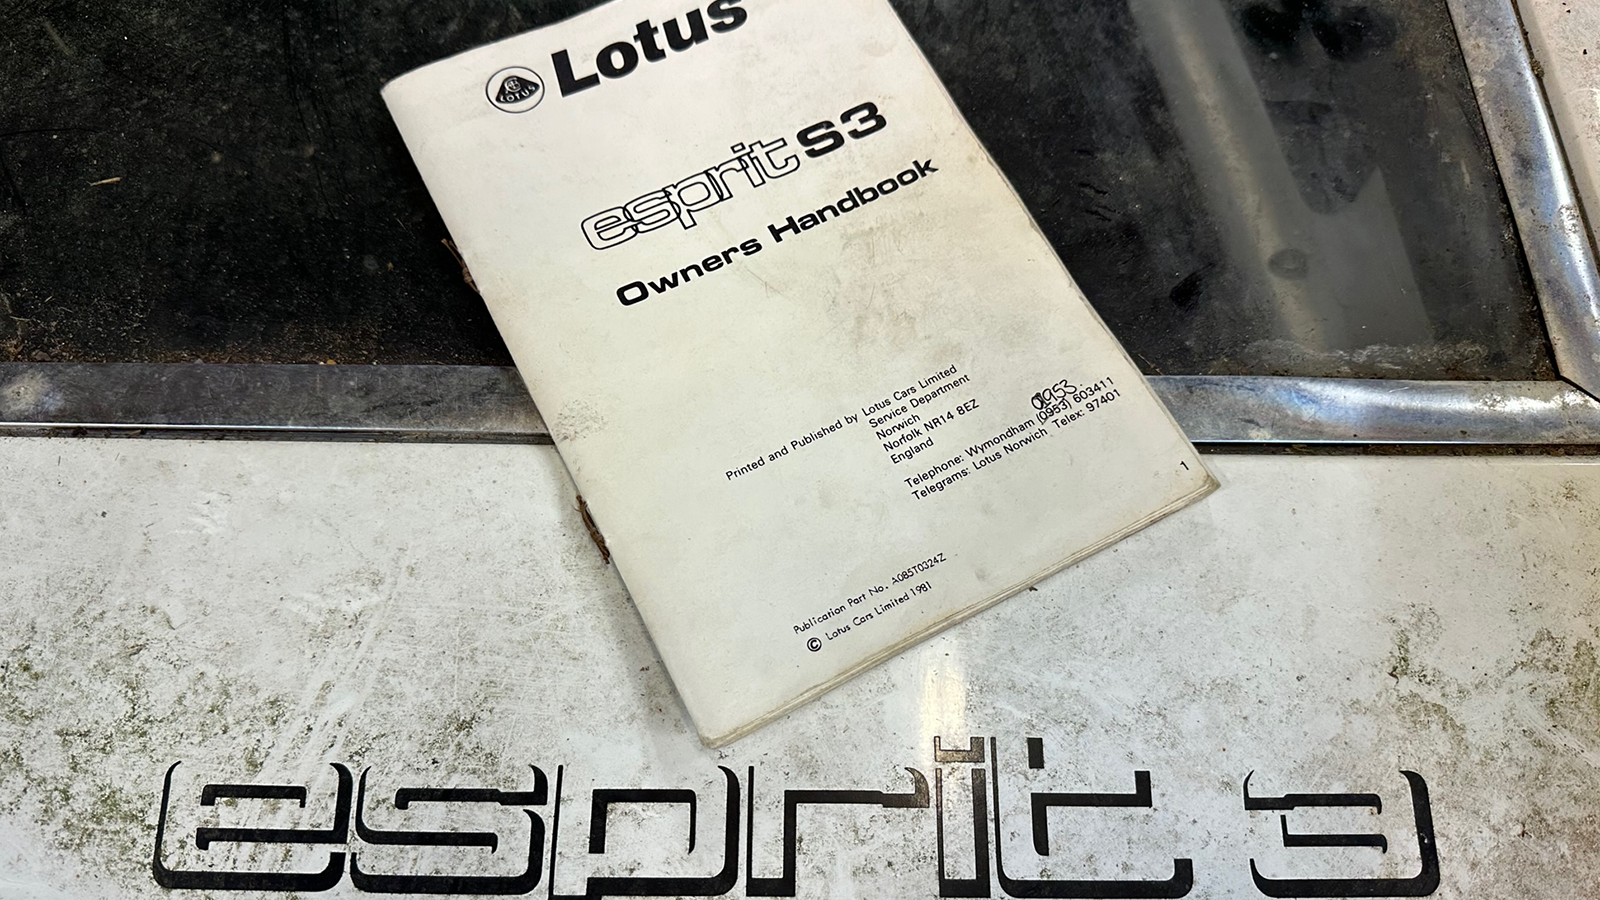 This barn-find Lotus Esprit could be yours